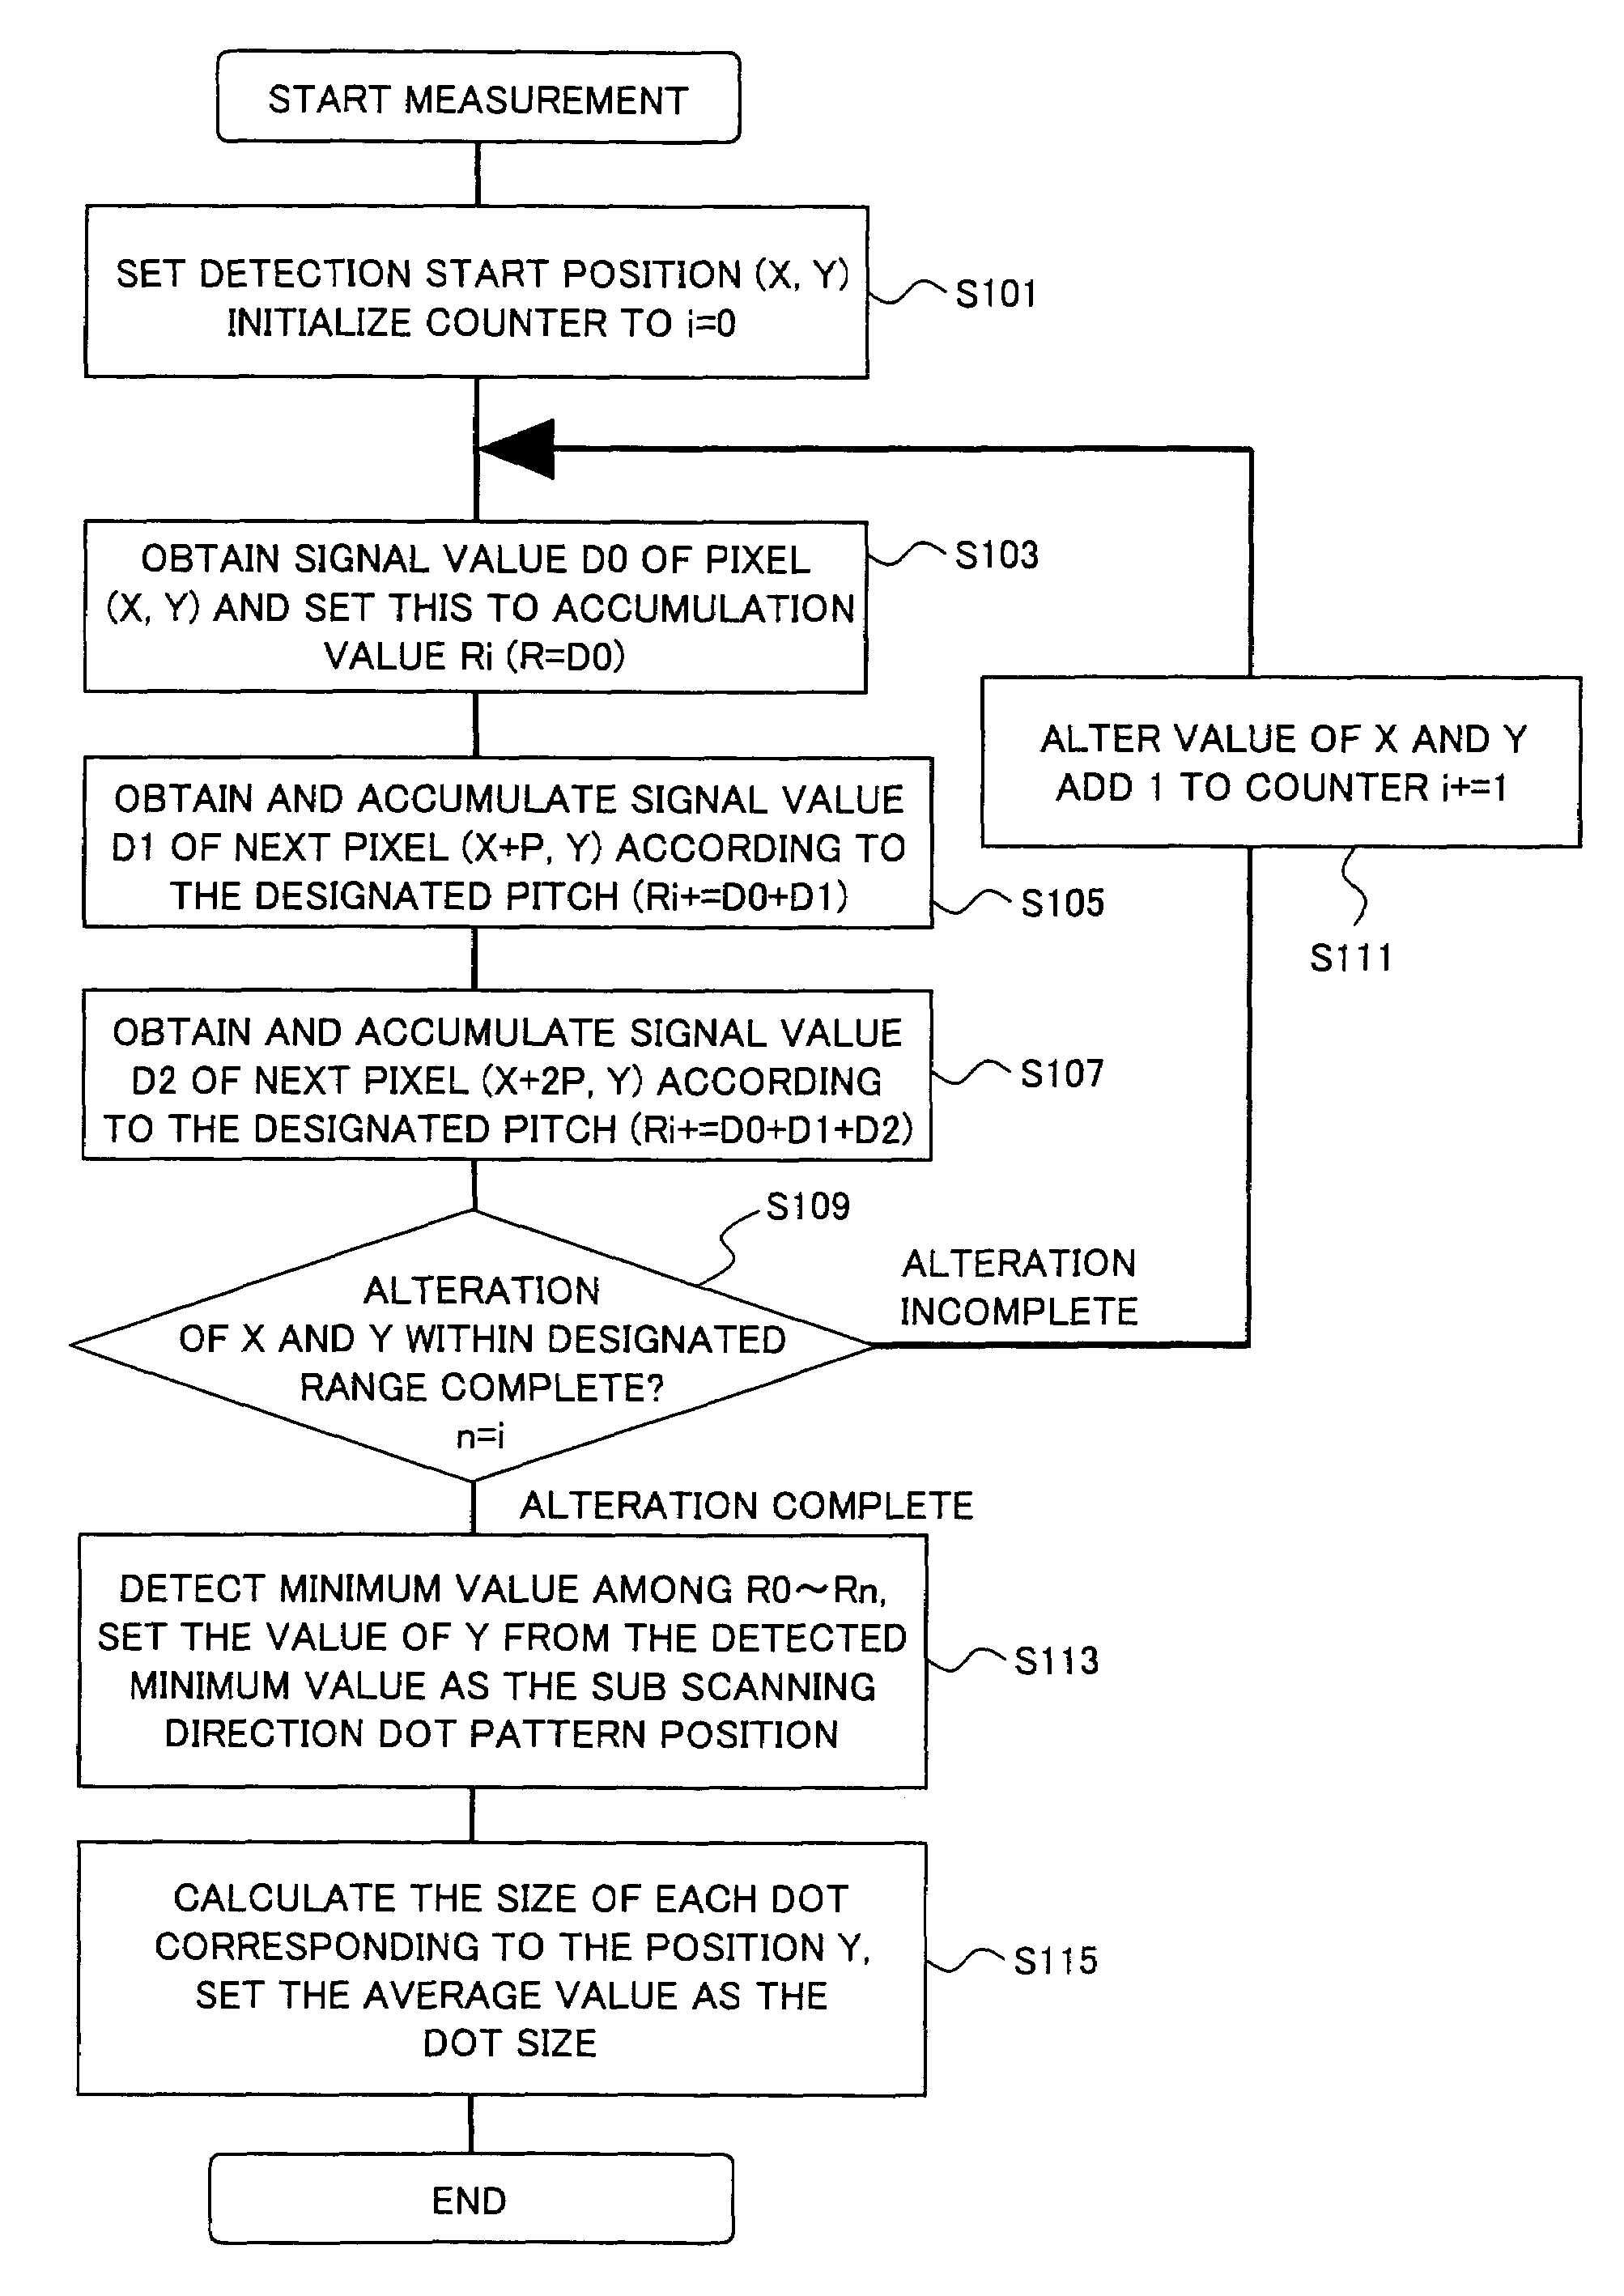 Image evaluation apparatus and method